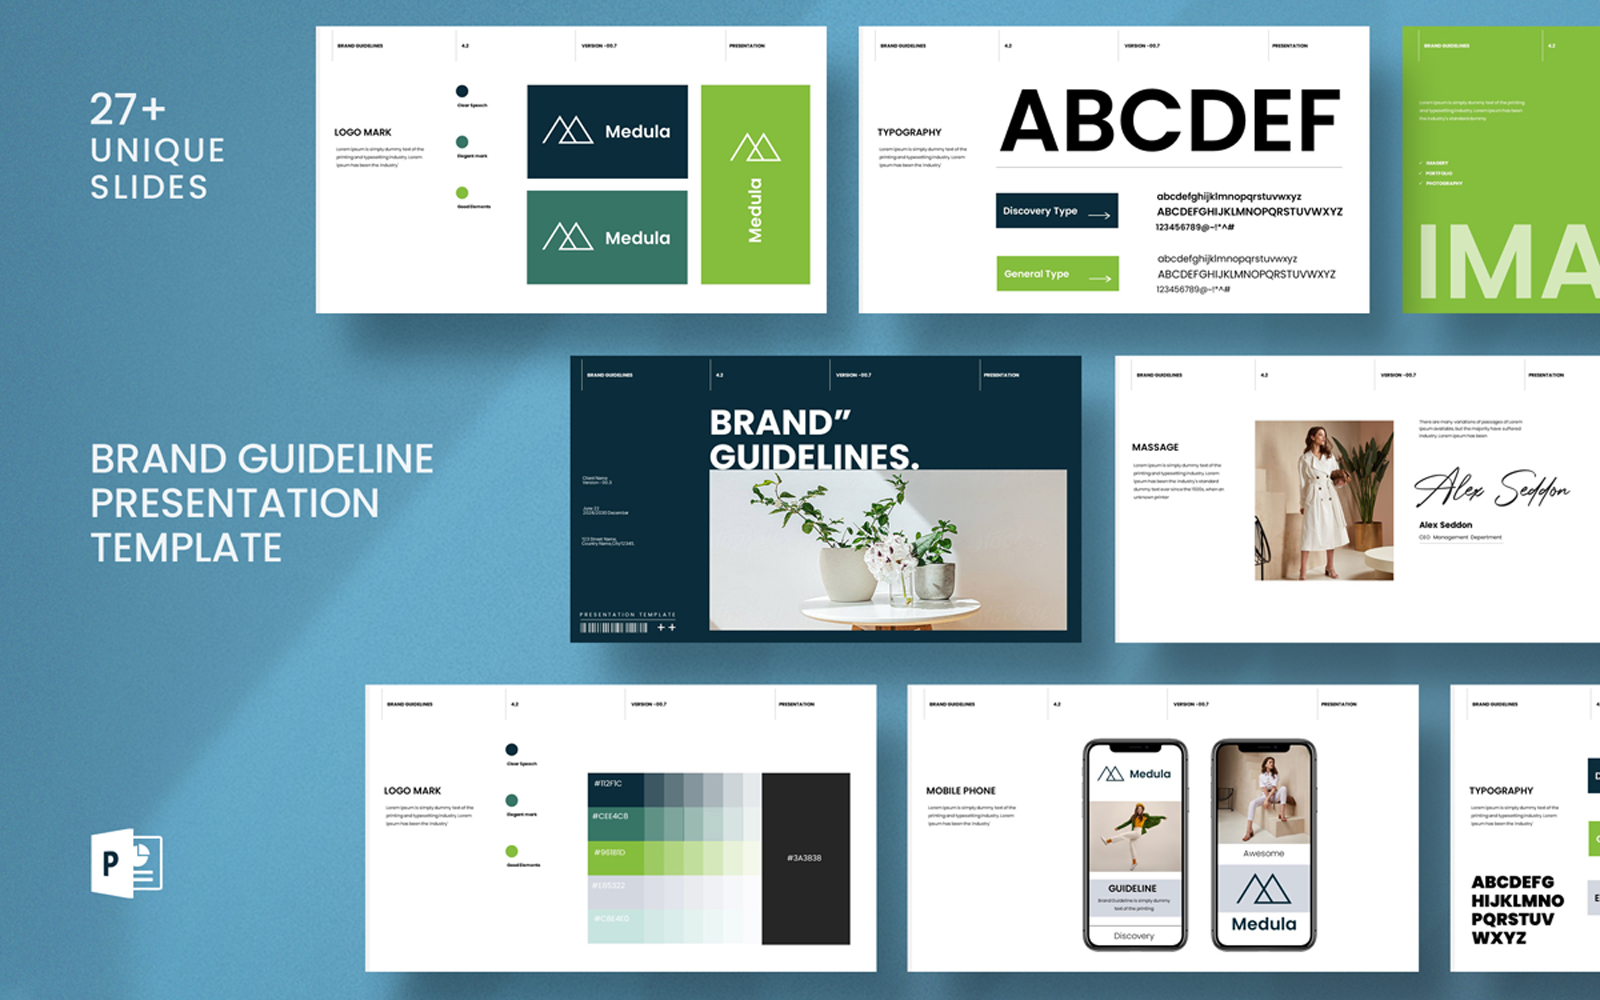 Brand Guidelines Presentation Template__